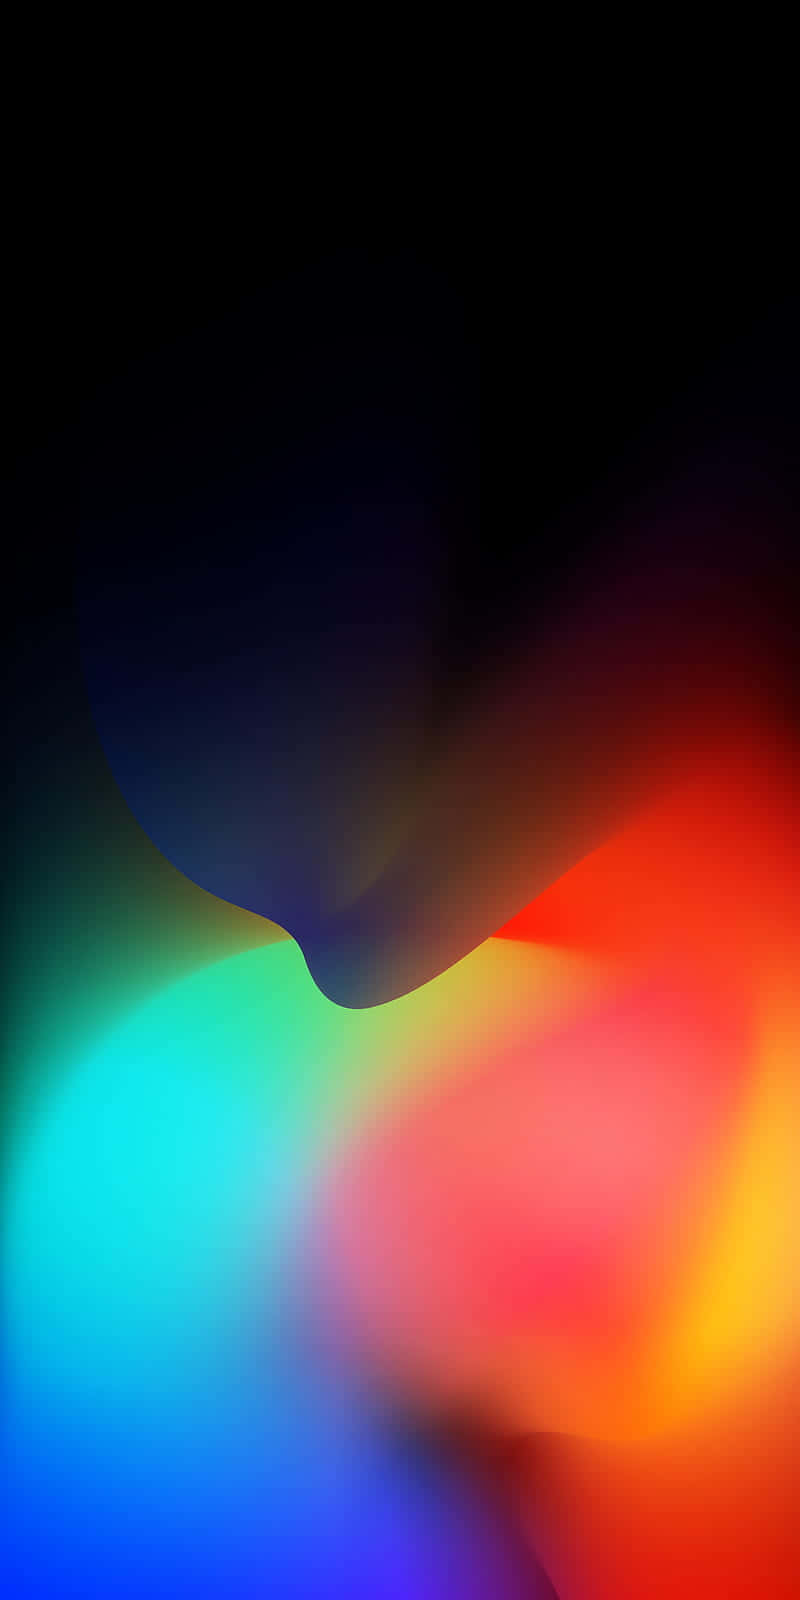 Make your iPhone stand out with this unique lock screen look. Wallpaper